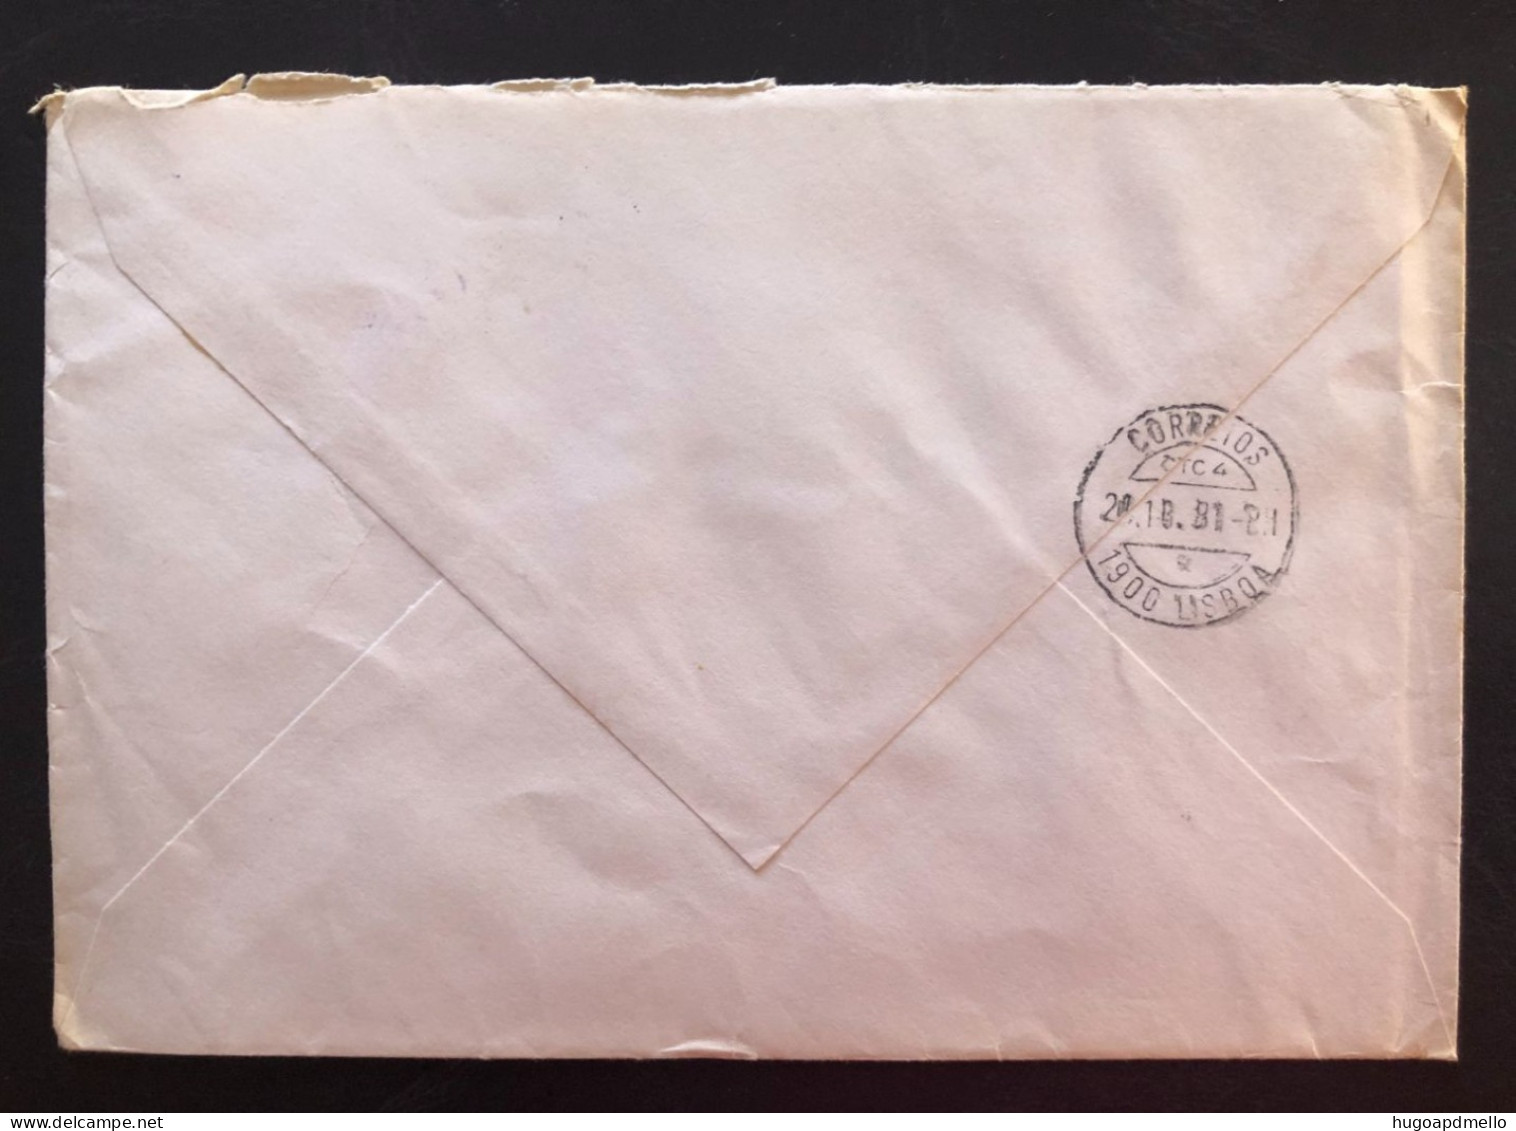 PORTUGAL, Registered Circulated Cover To Spain (Barcelona), « Discovery Of Madeira », 1980 - Lettres & Documents